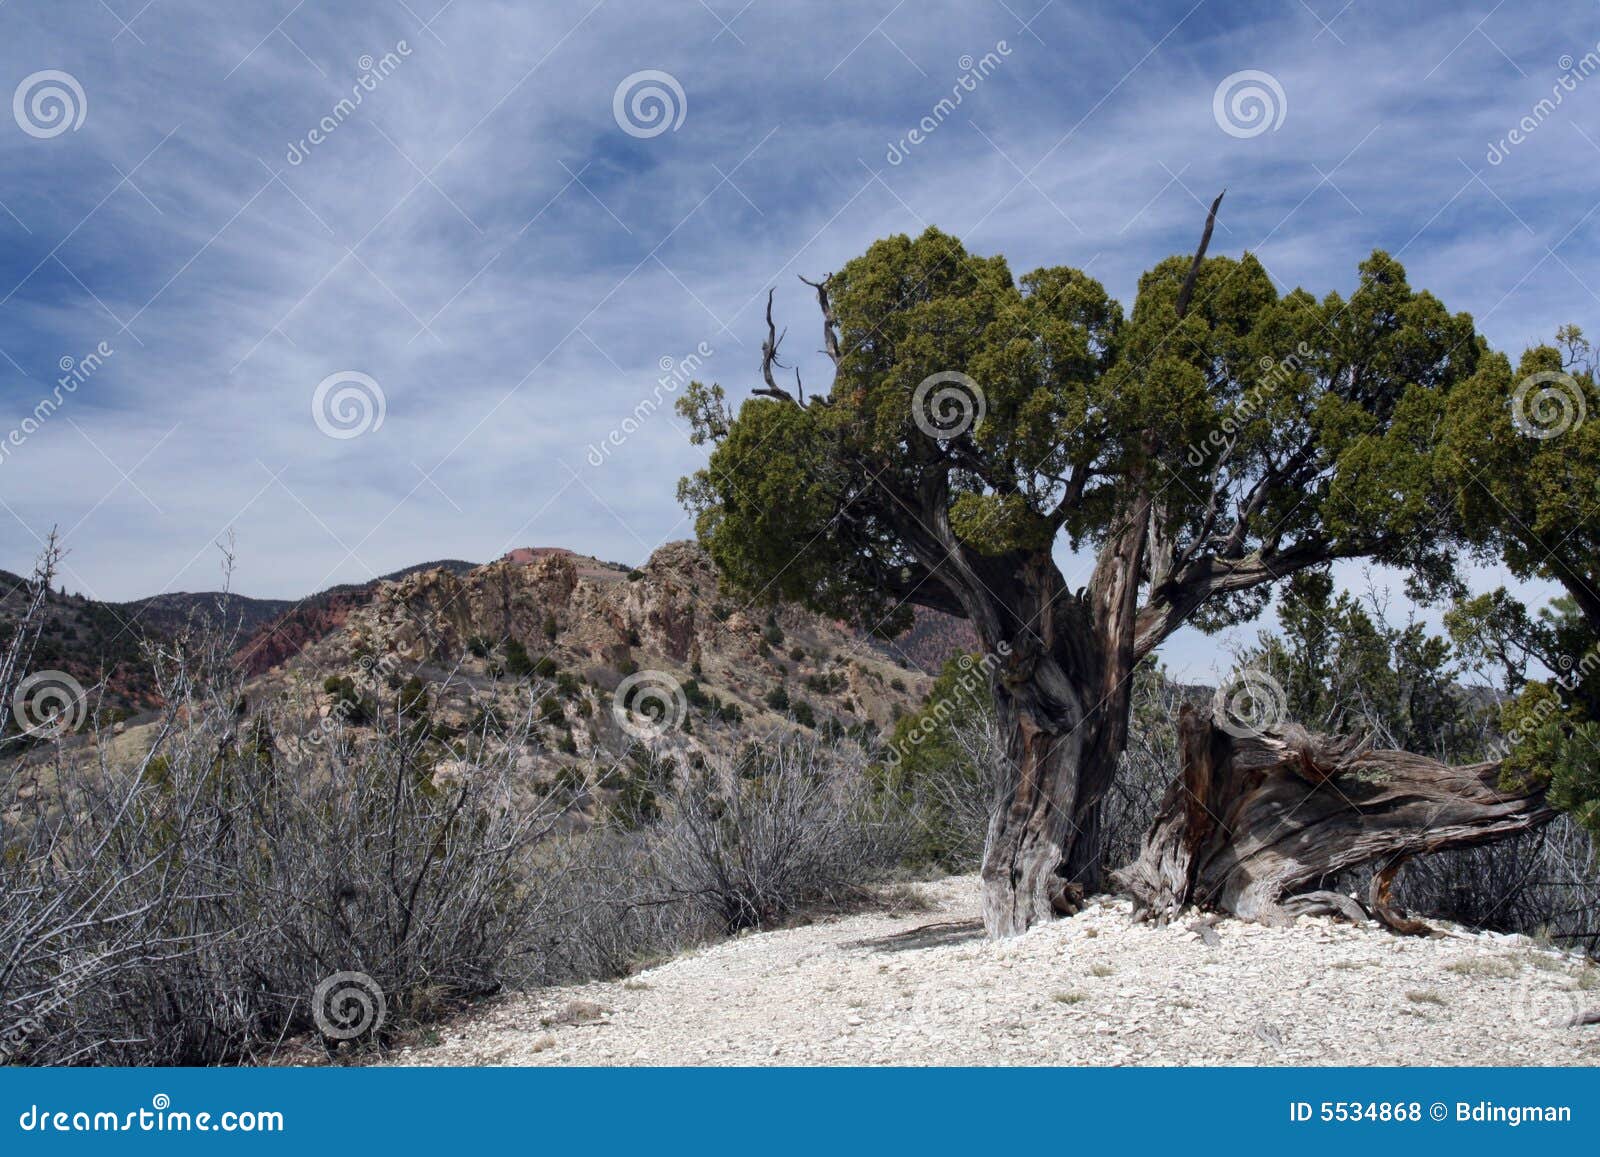 gnarled tree in desolate landscape